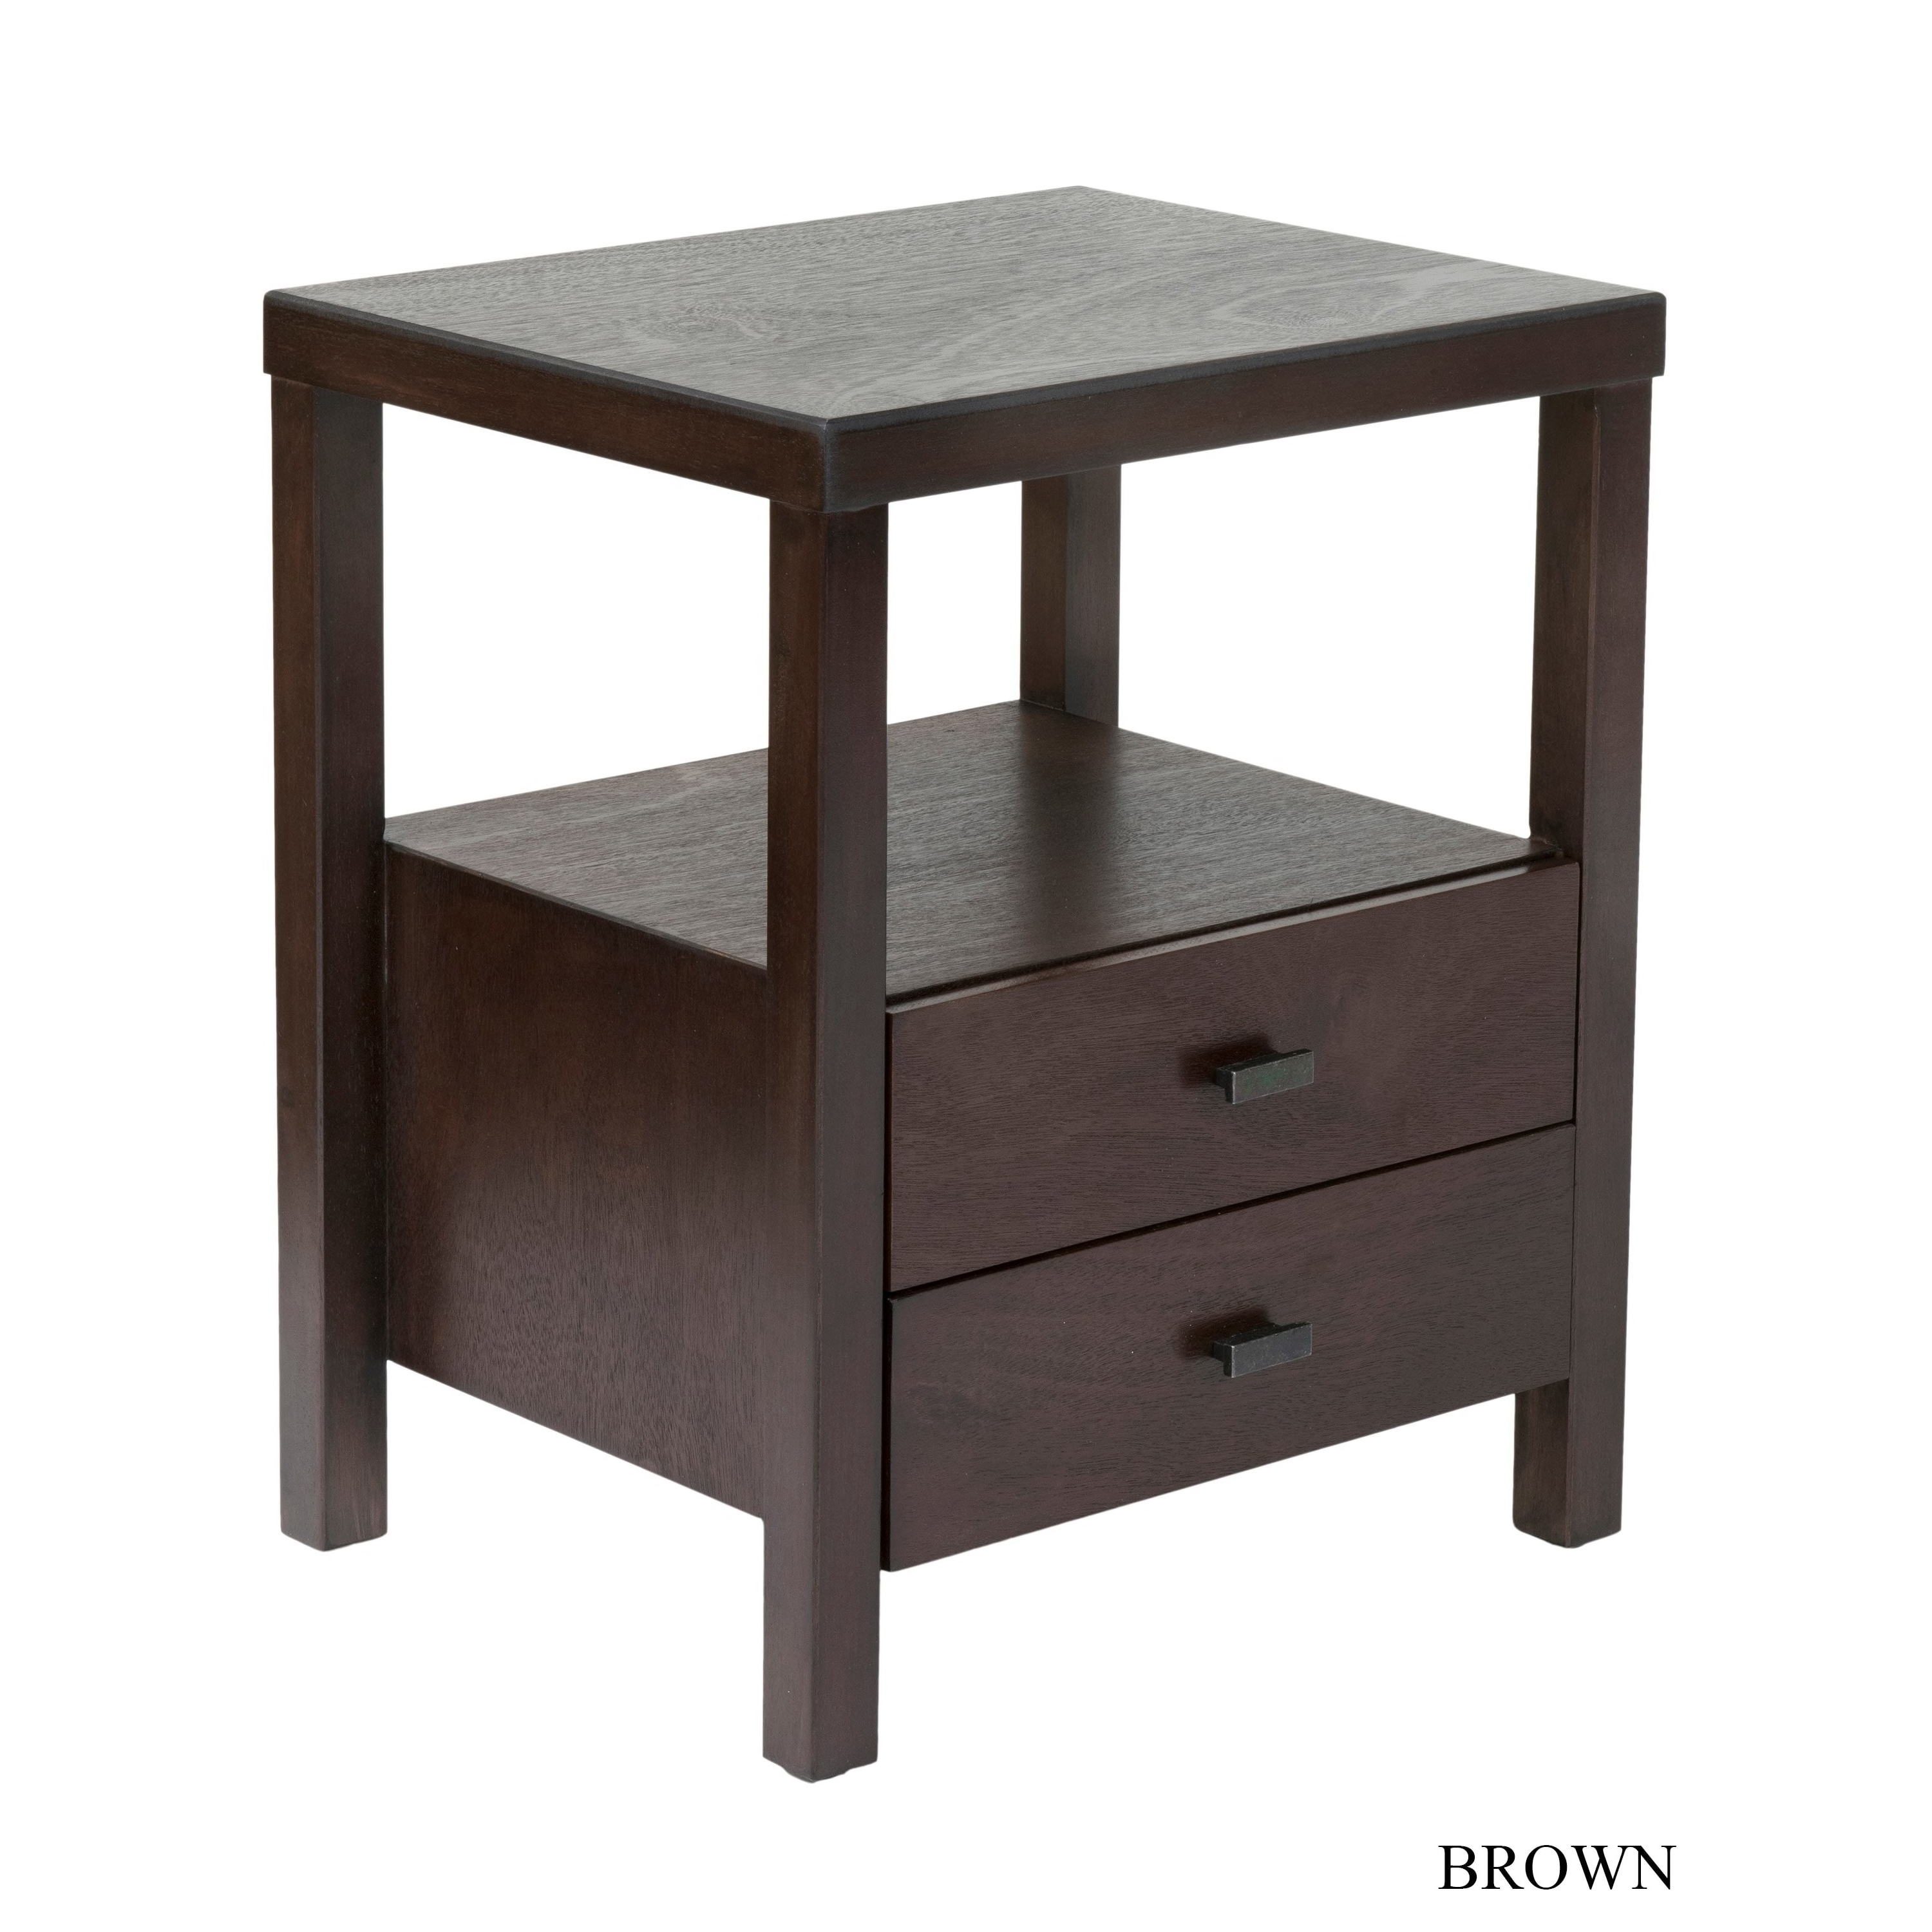 porch den ashmont westwood acacia wood square accent table east mains free shipping today timber furniture brisbane marble and side best home decor ping websites target project